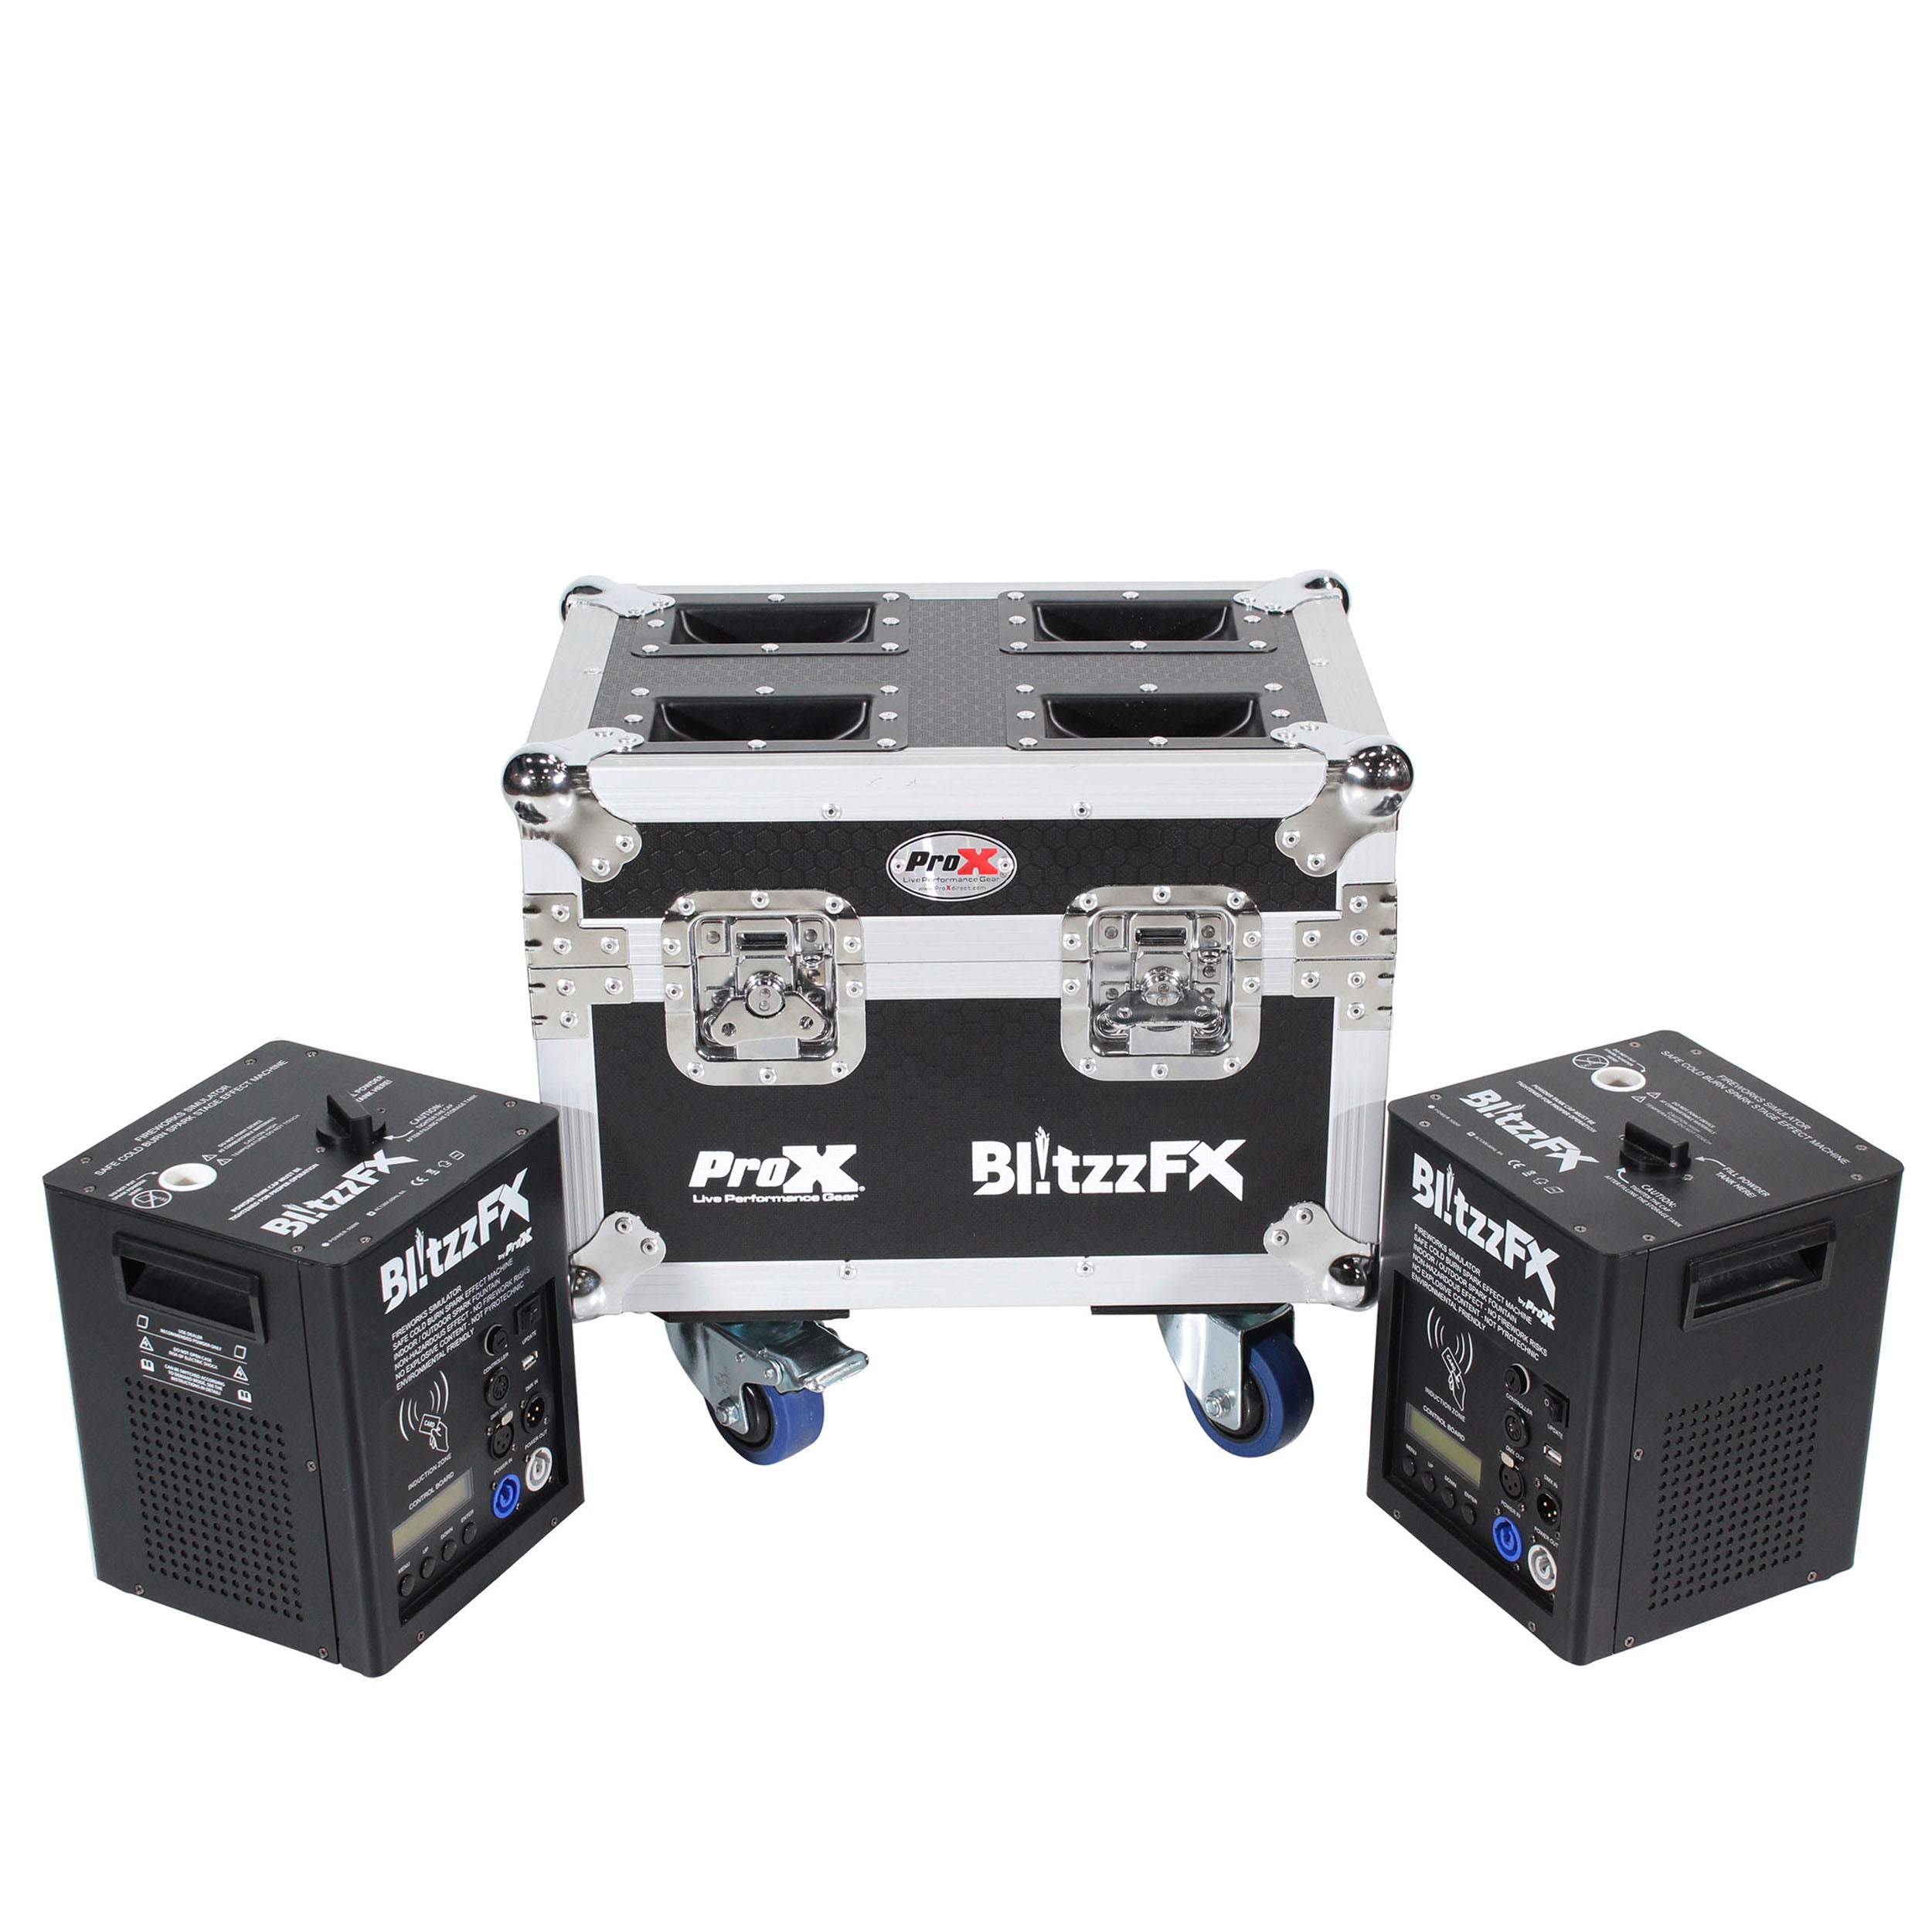 Pro X BlitzzFX Set of two Cold Spark Machines with White Covers and Case X-BLITZZFXX2